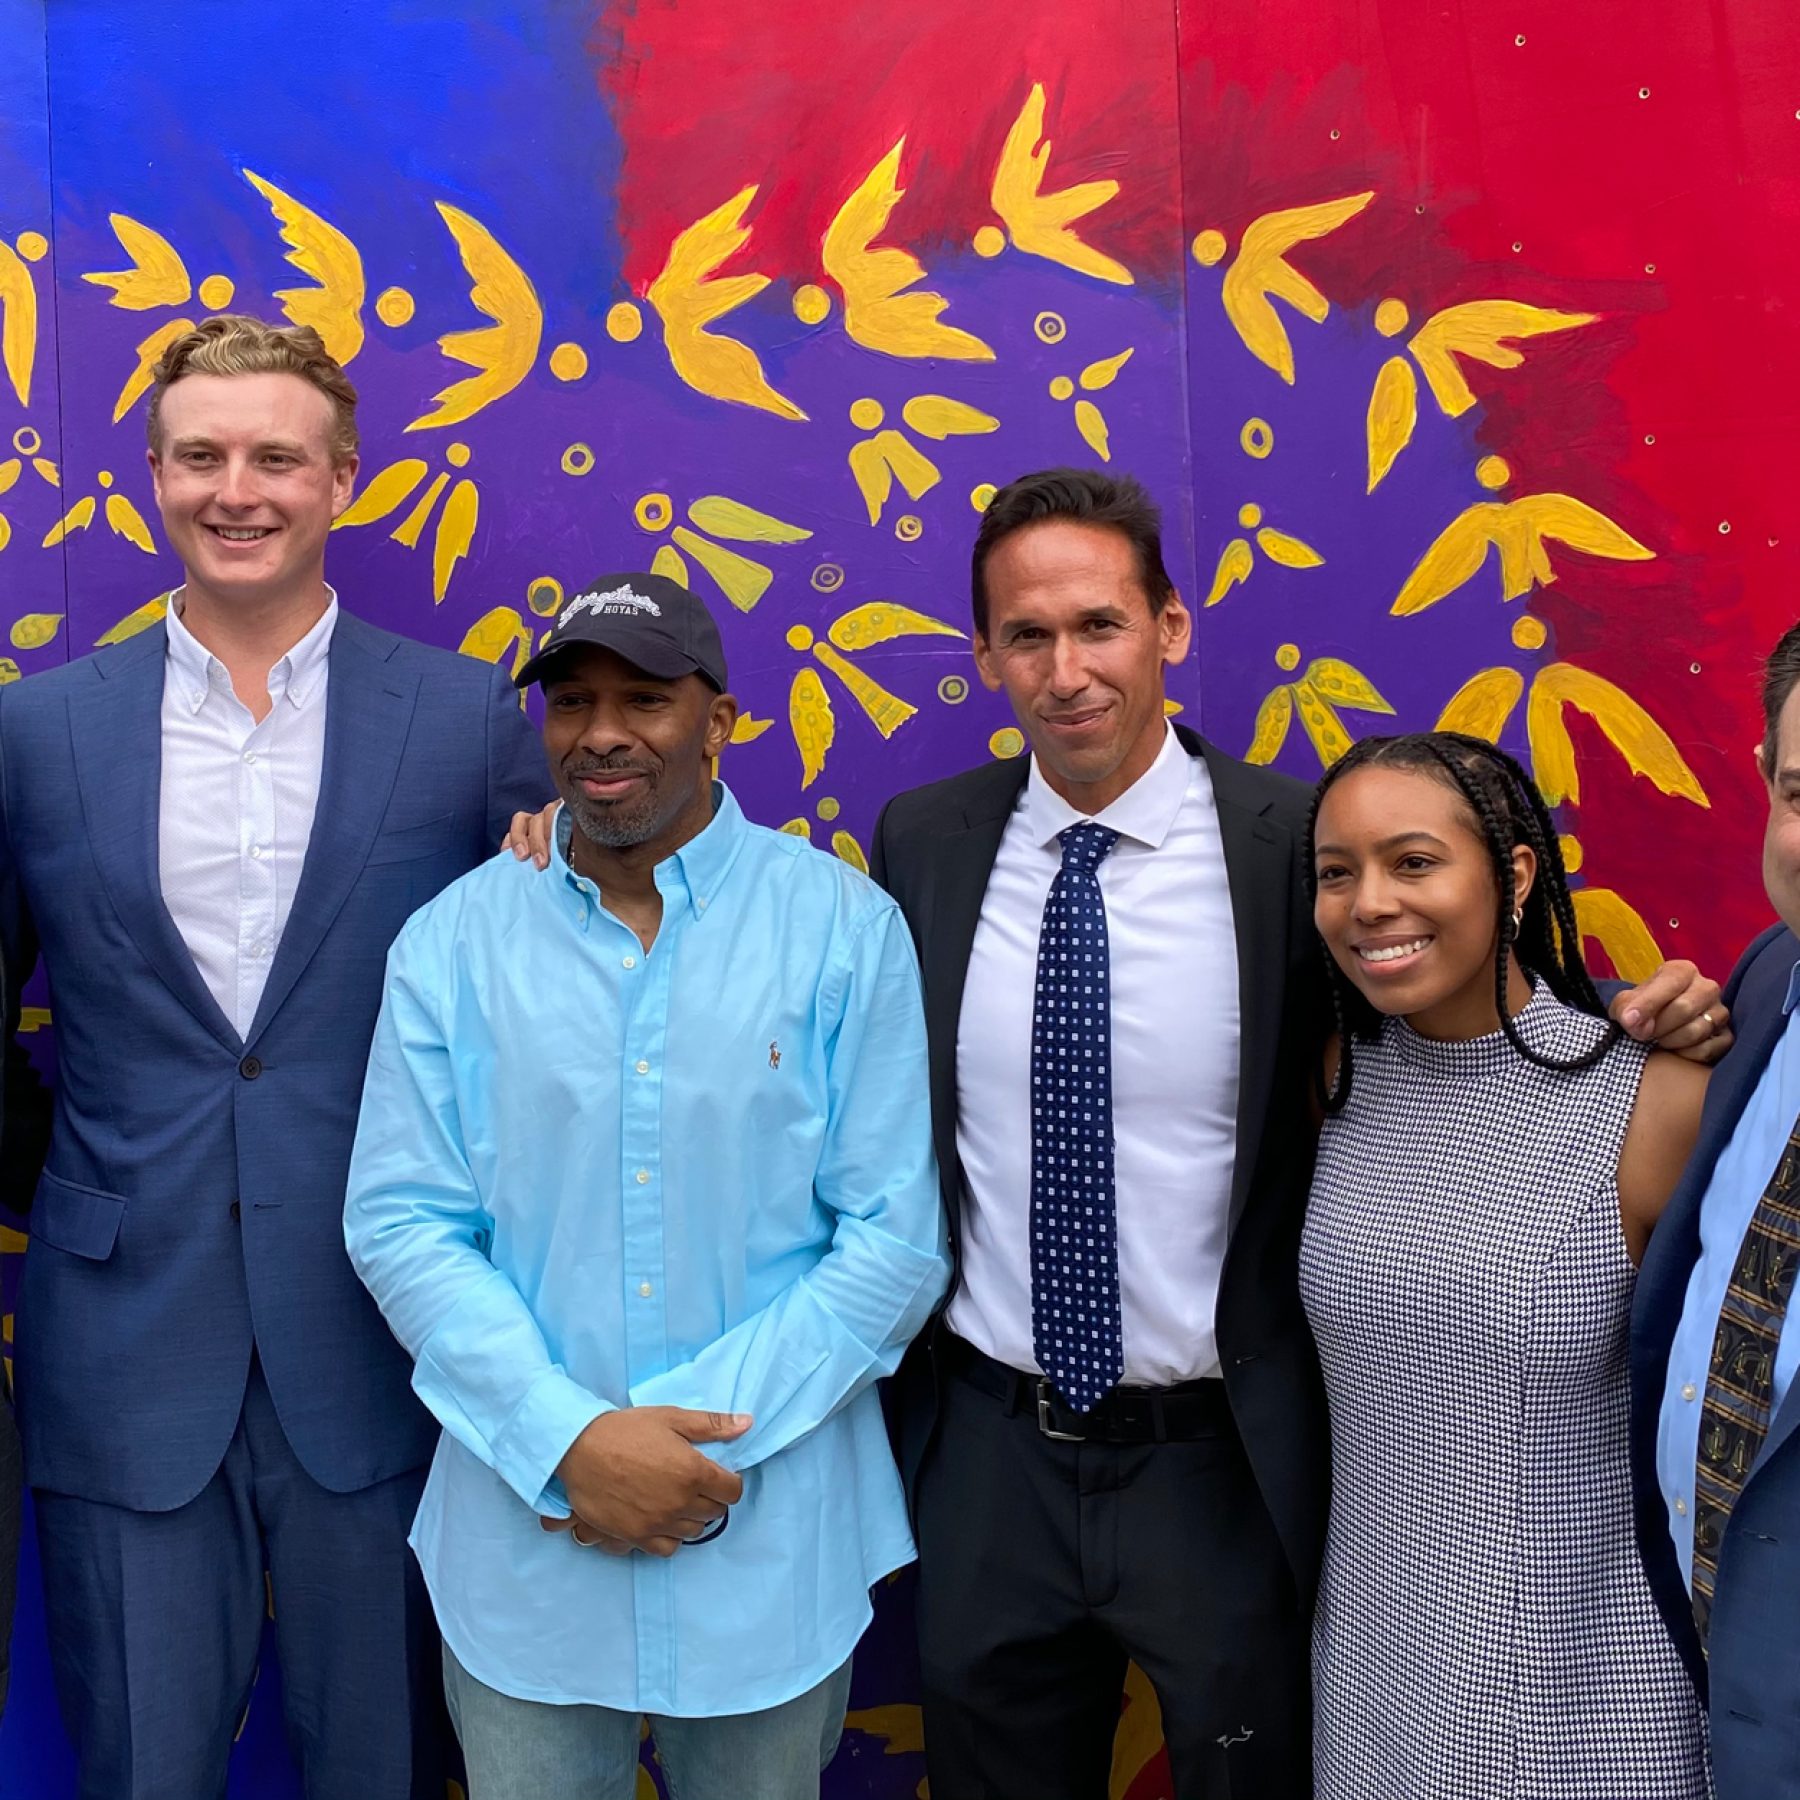 Students with Eric Riddick and Professor Marc Howard in front of a blue and red background with a purple and yellow heart in the middle